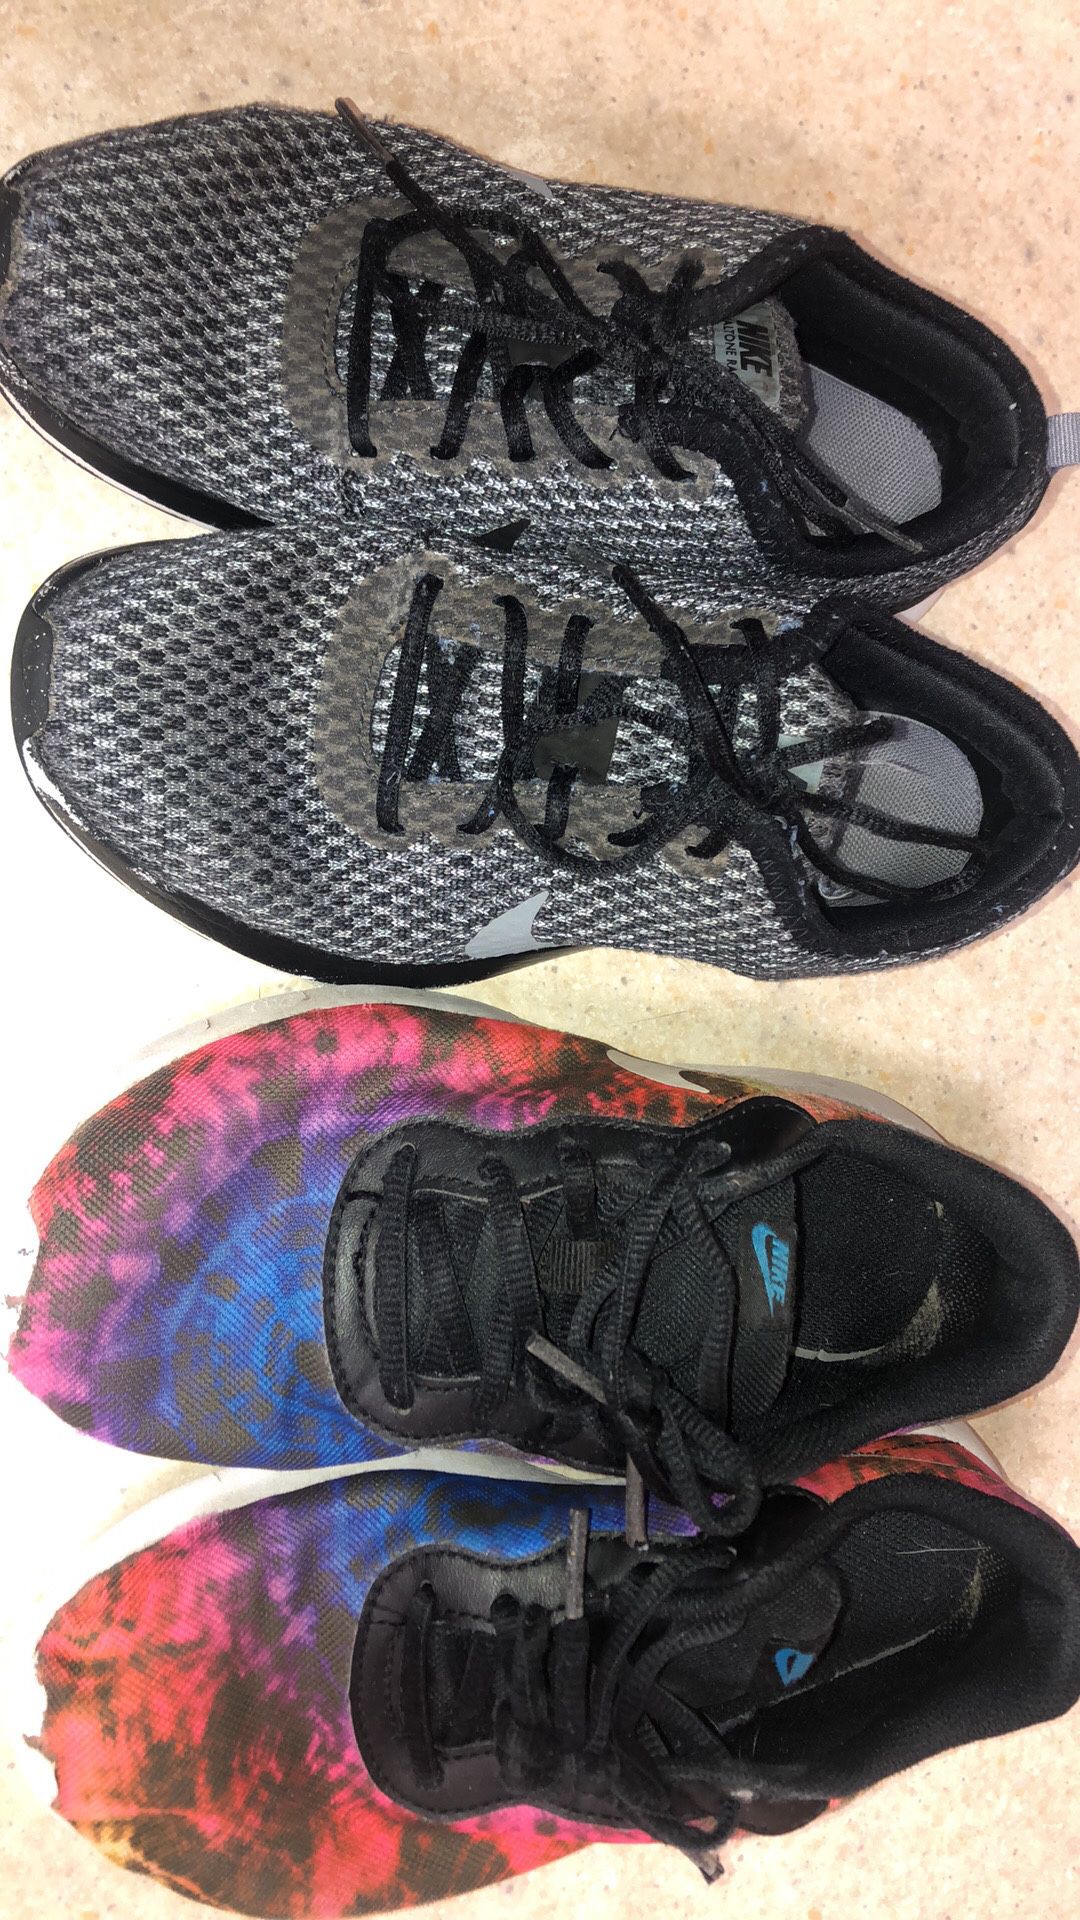 Boys Nike Shoes Both for $5